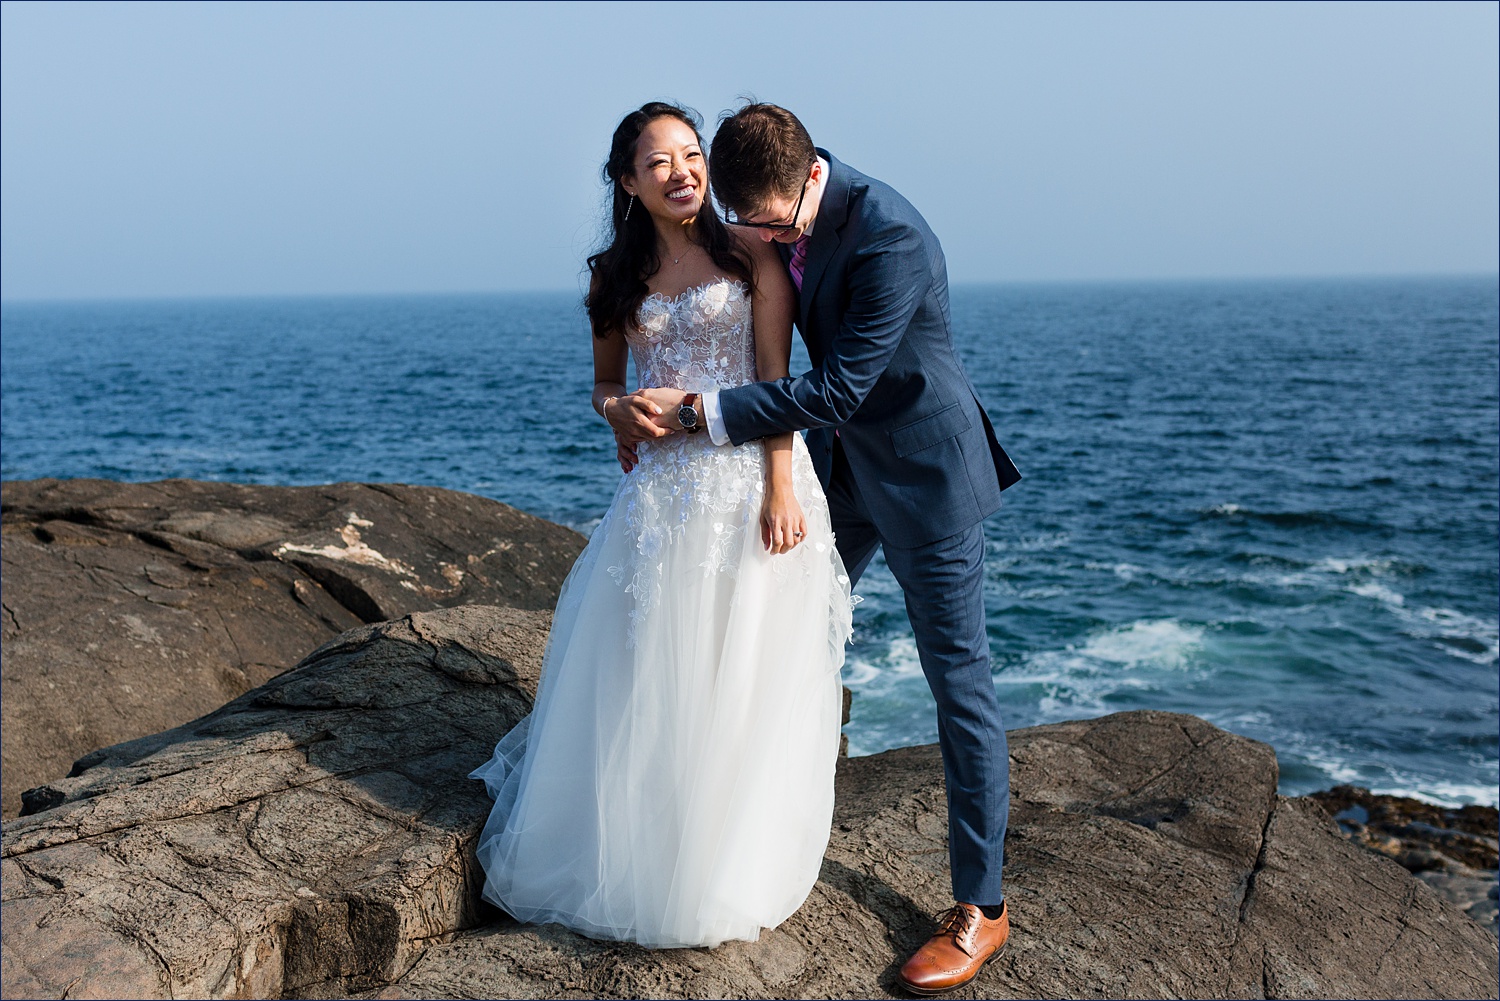 The newlyweds laugh together on the rocky shore of Ogunquit Maine